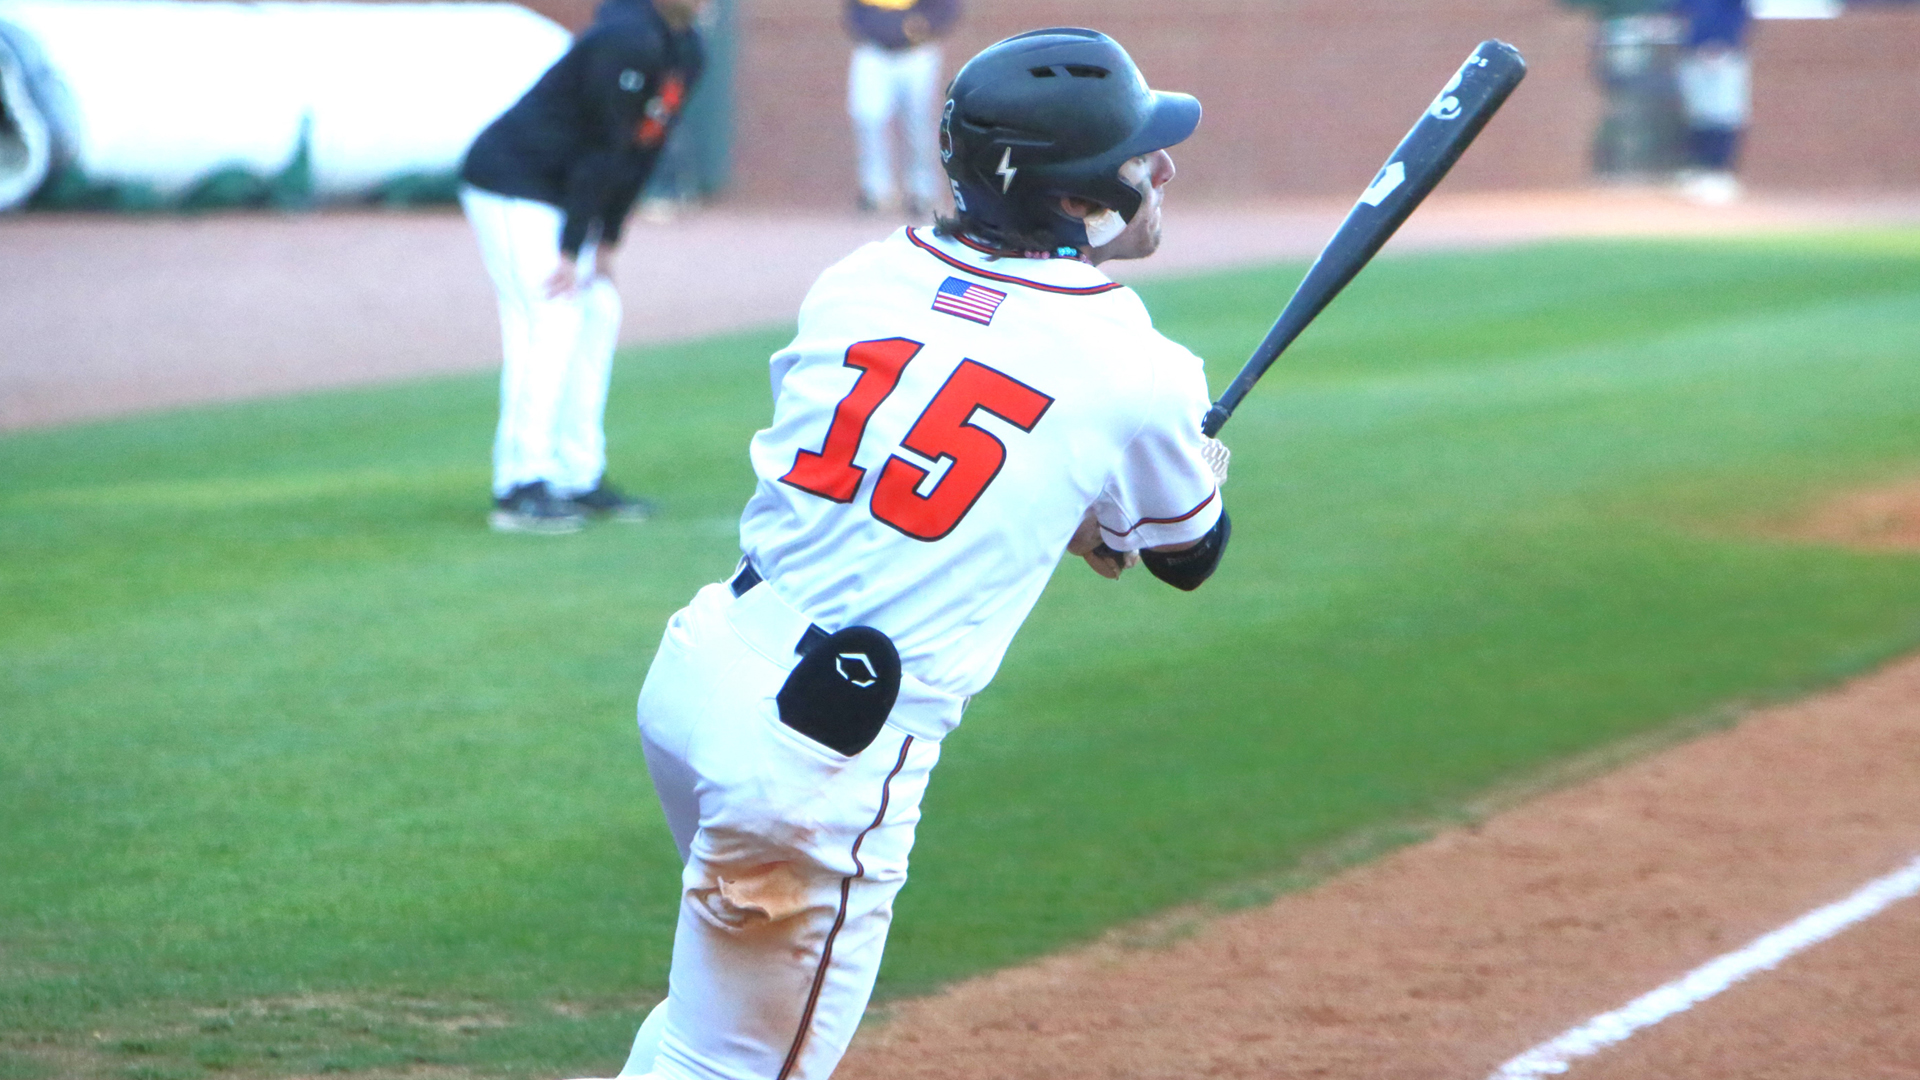 Ben Scartz went 4-for-5 with three extra base hits against Emory & Henry (photo by Dom Donnelly)